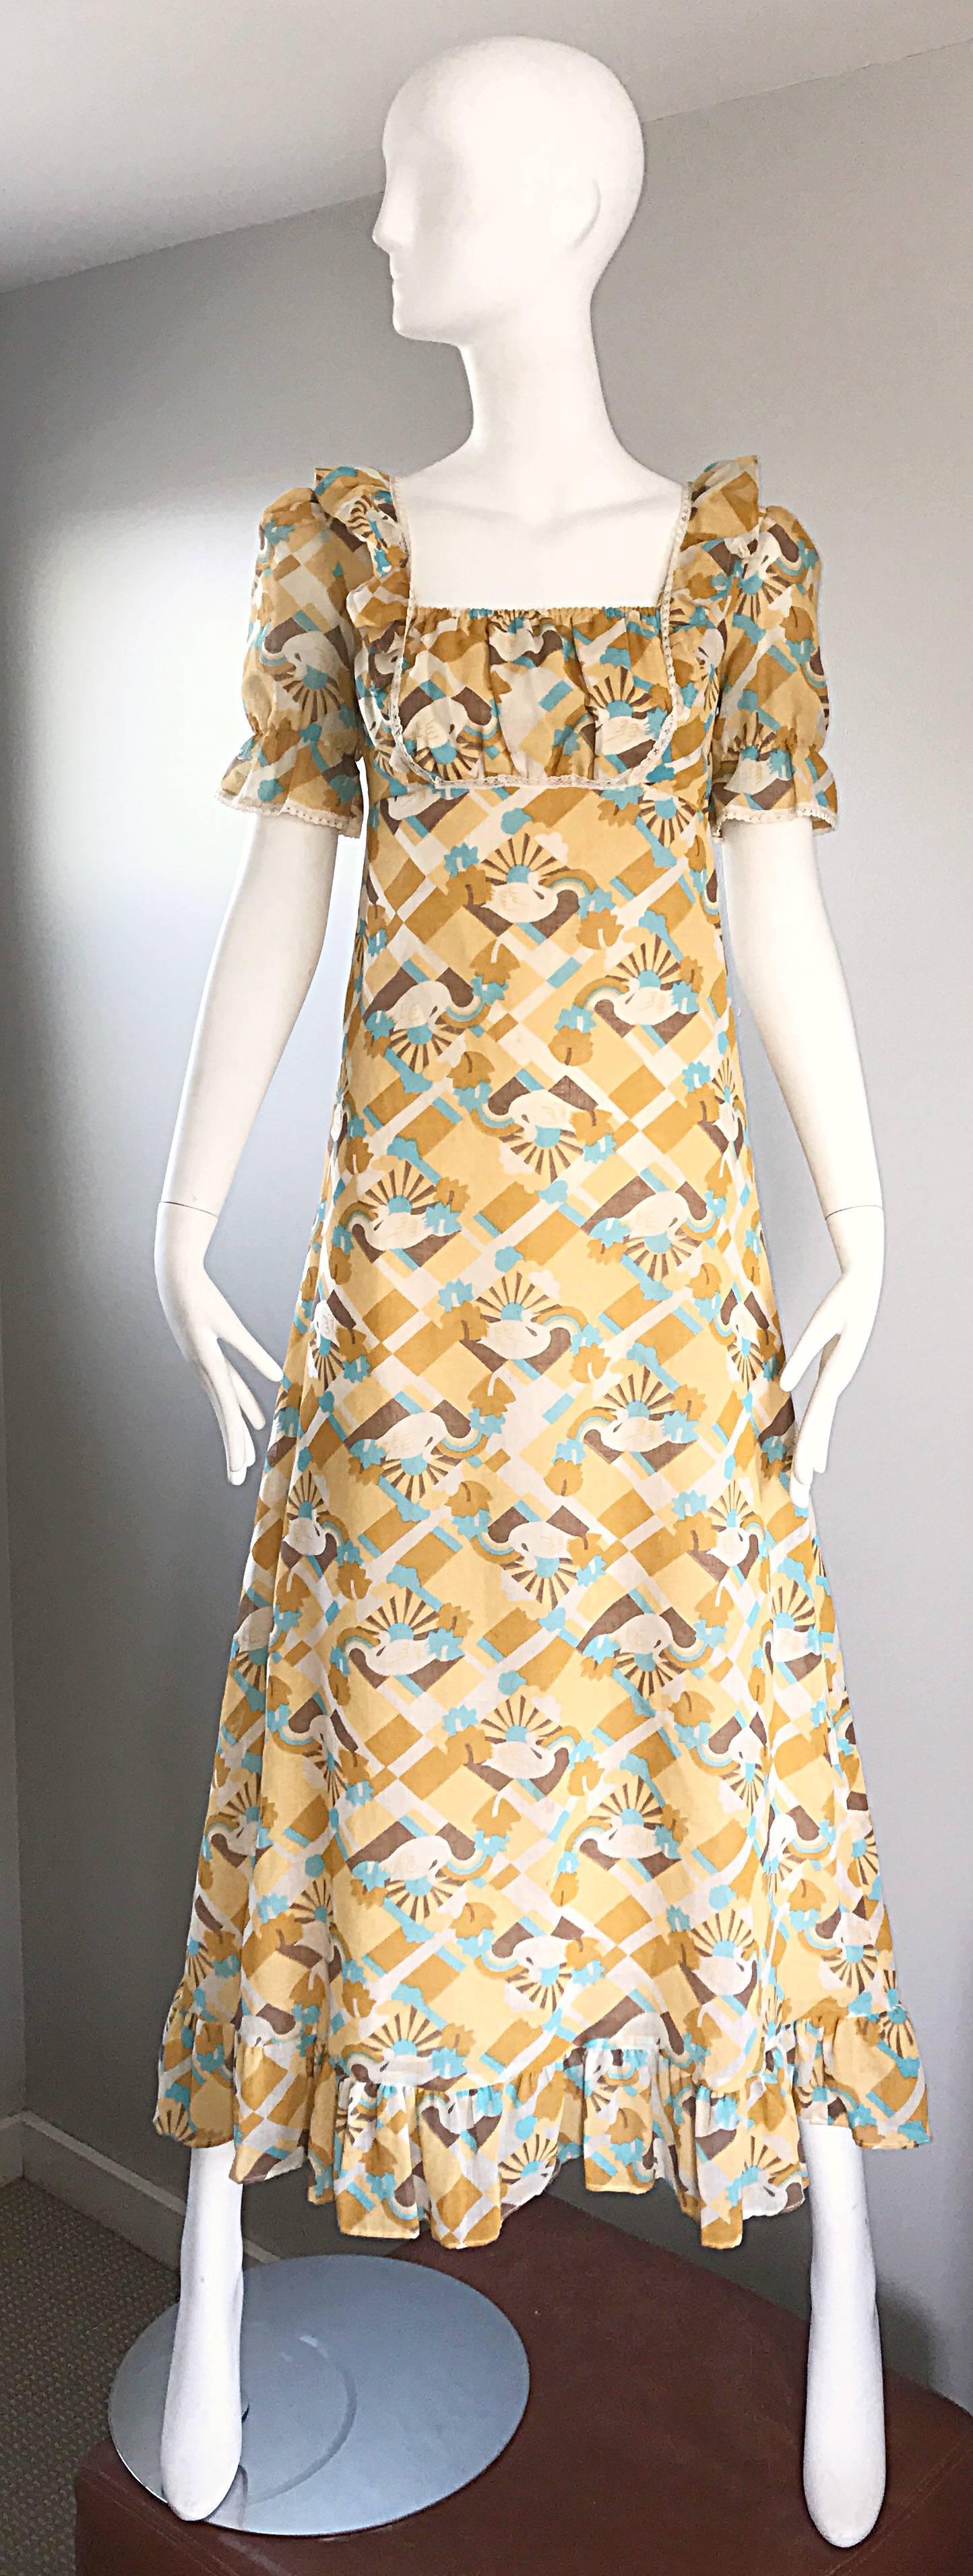 Outstanding vintage 1970s swan print novelty maxi dress! Features blue, yellow, brown and white colors, with swans printed throughout. Features a ruffled hem, puff, sleeves, and ruching at the bodice. Hidden metal zipper up the back. Very good